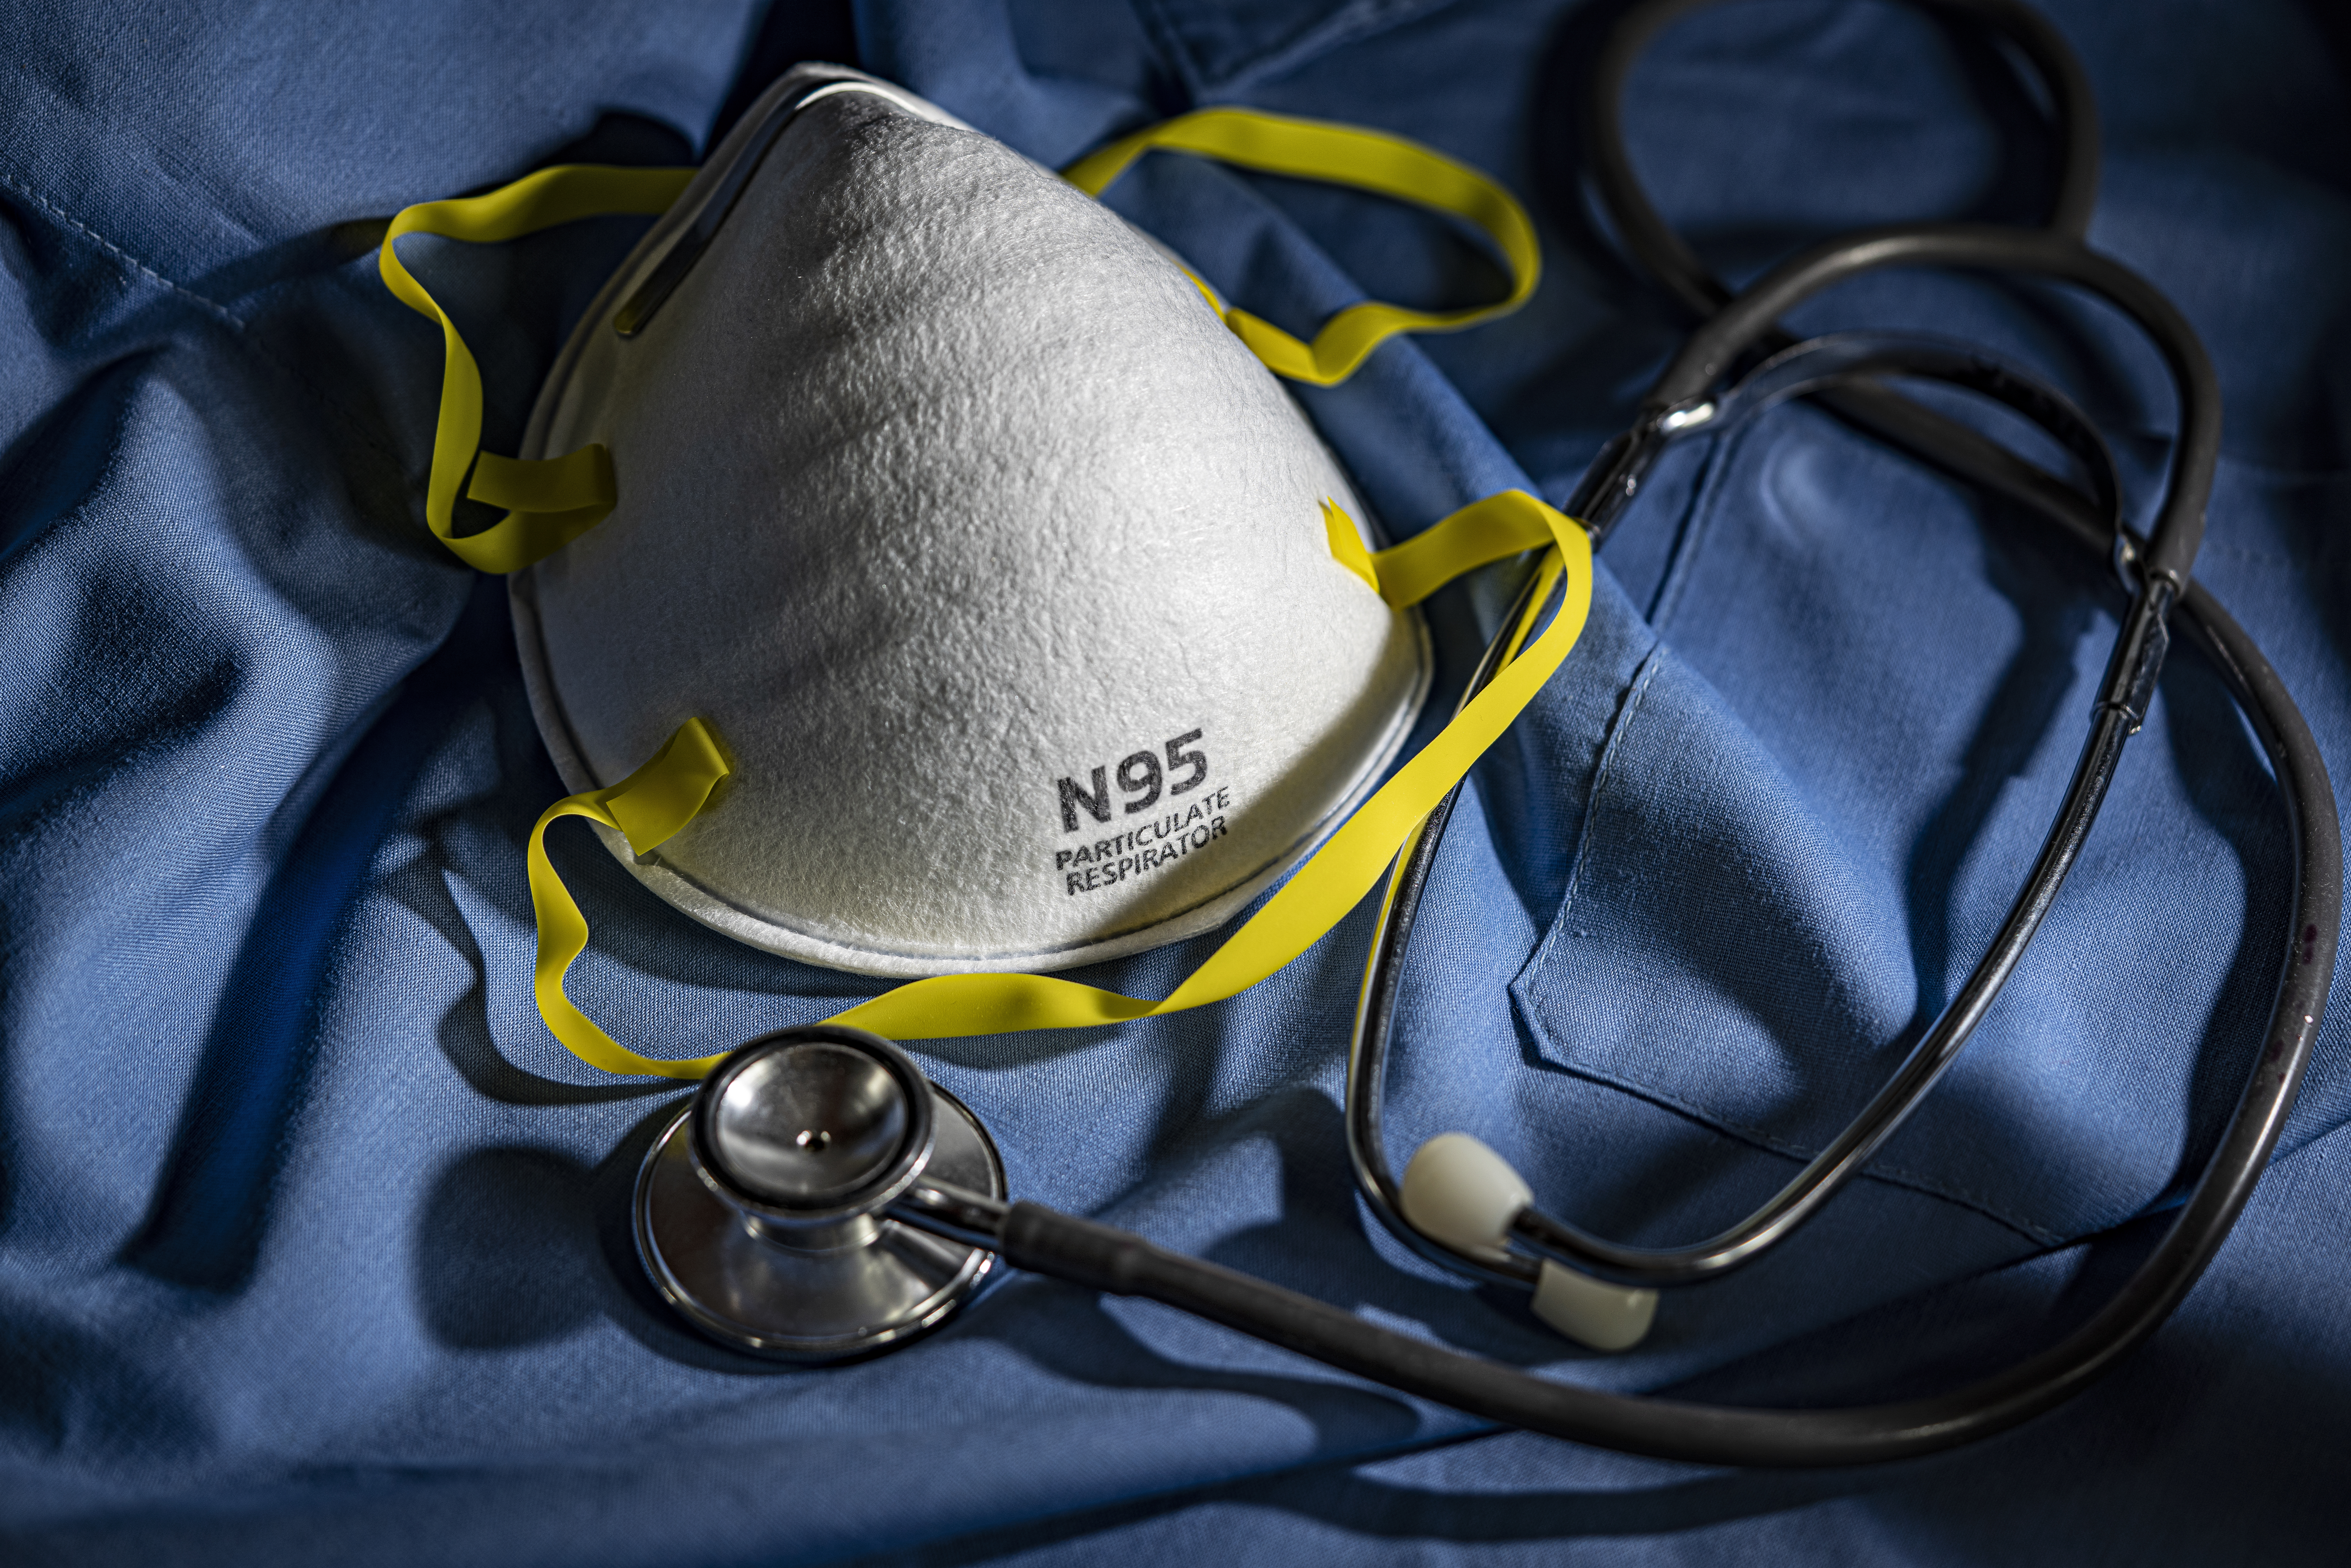 Close-up of Protective N95 Mask on Blue Scrubs with Stethoscope